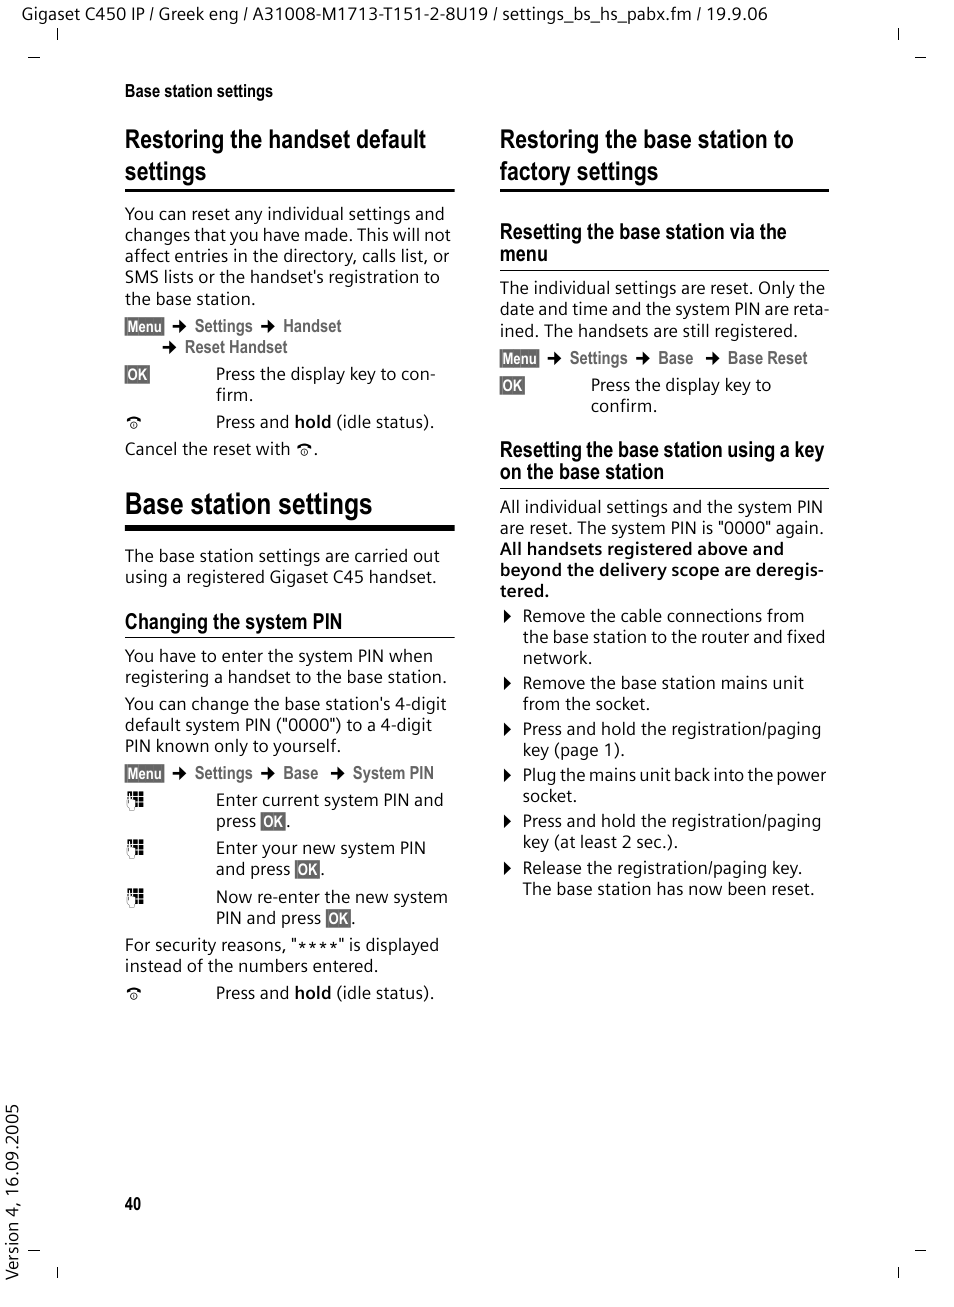 Restoring the handset default settings, Base station settings, Changing the  system pin | Siemens Gigaset C450 IP User Manual | Page 41 / 98